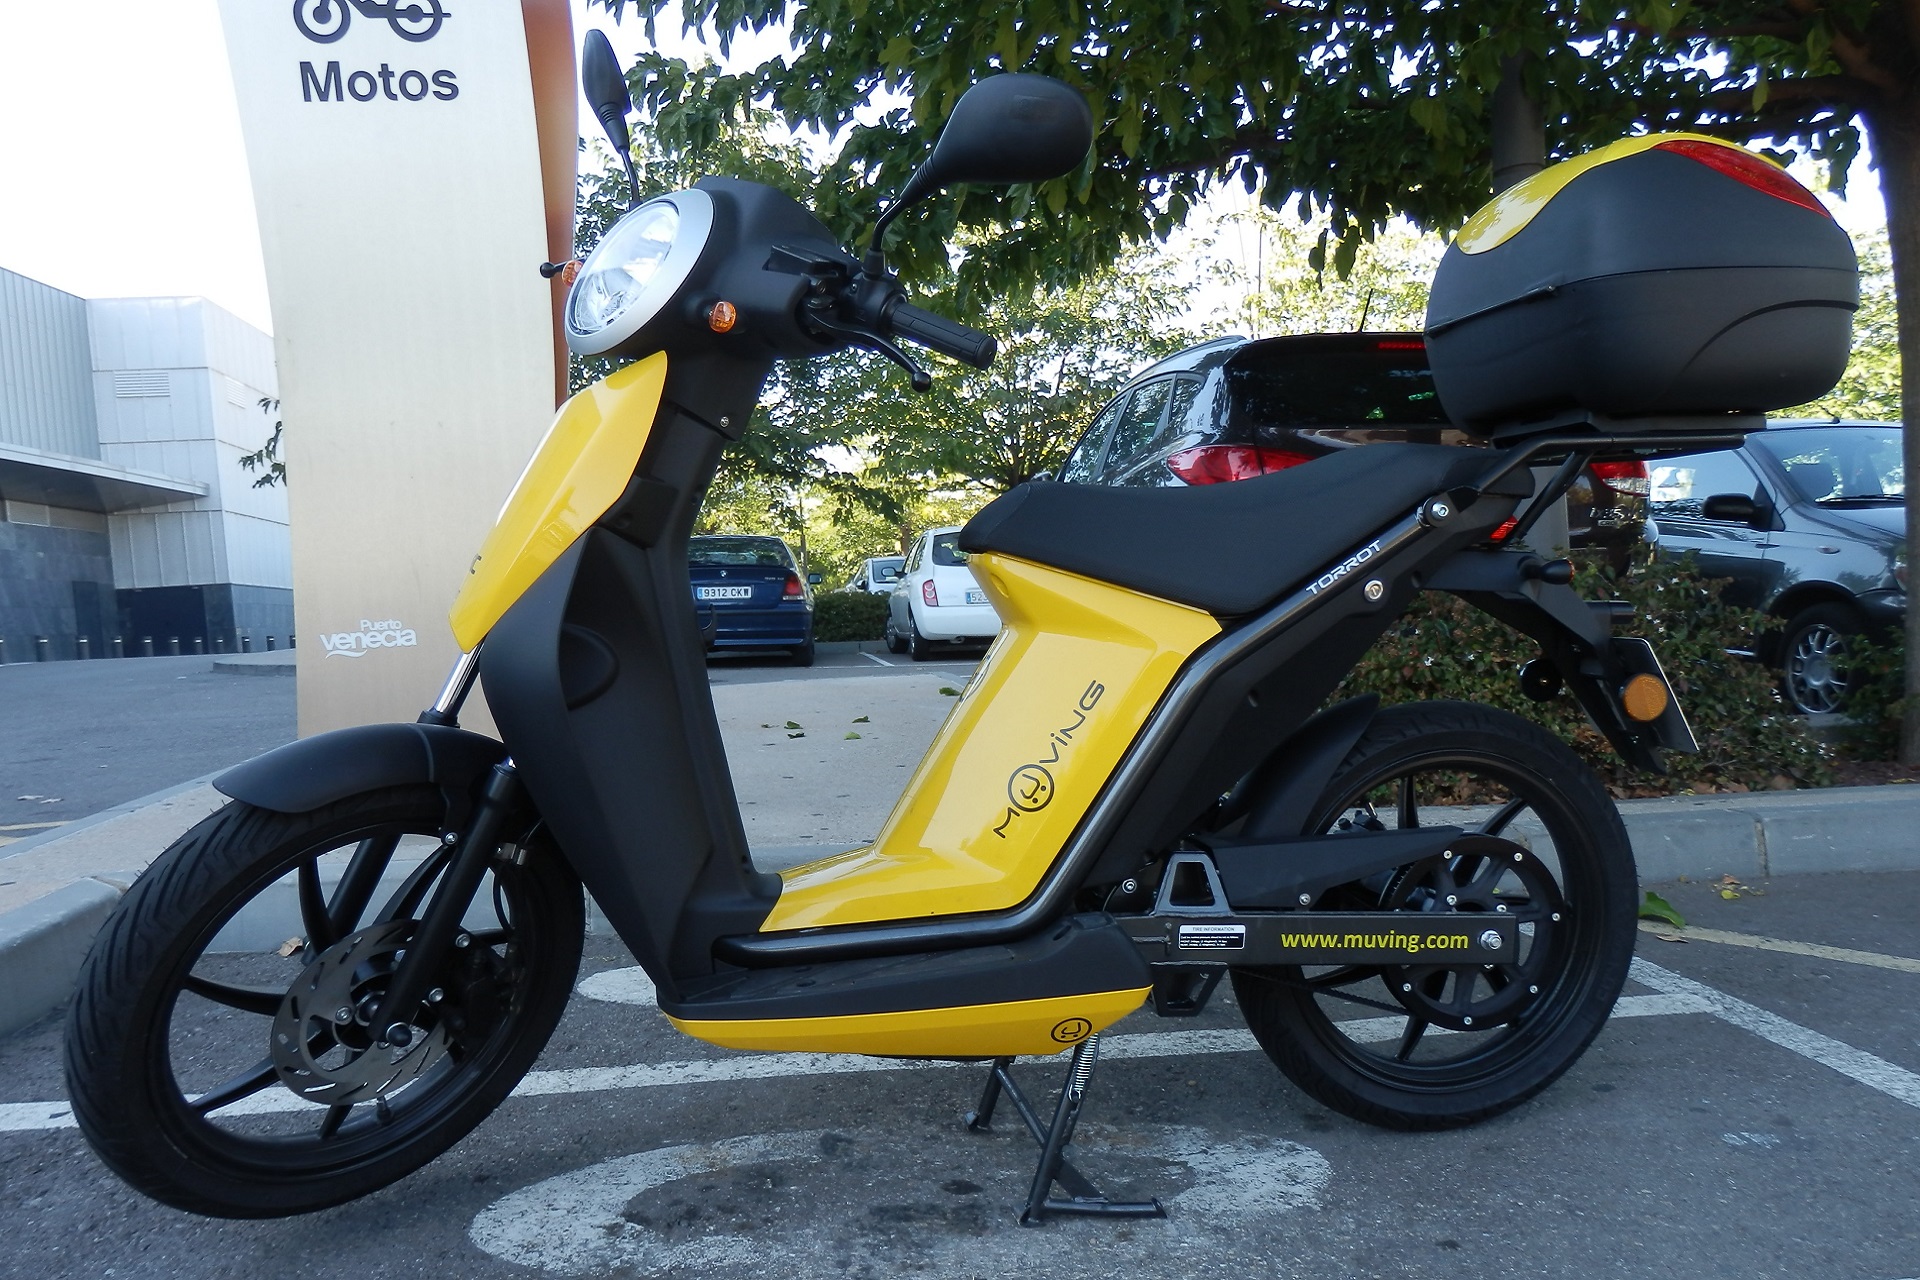 eBikeGo To Manufacture Spain-Based Torrot’s 2-Wheeler EV Muvi In India